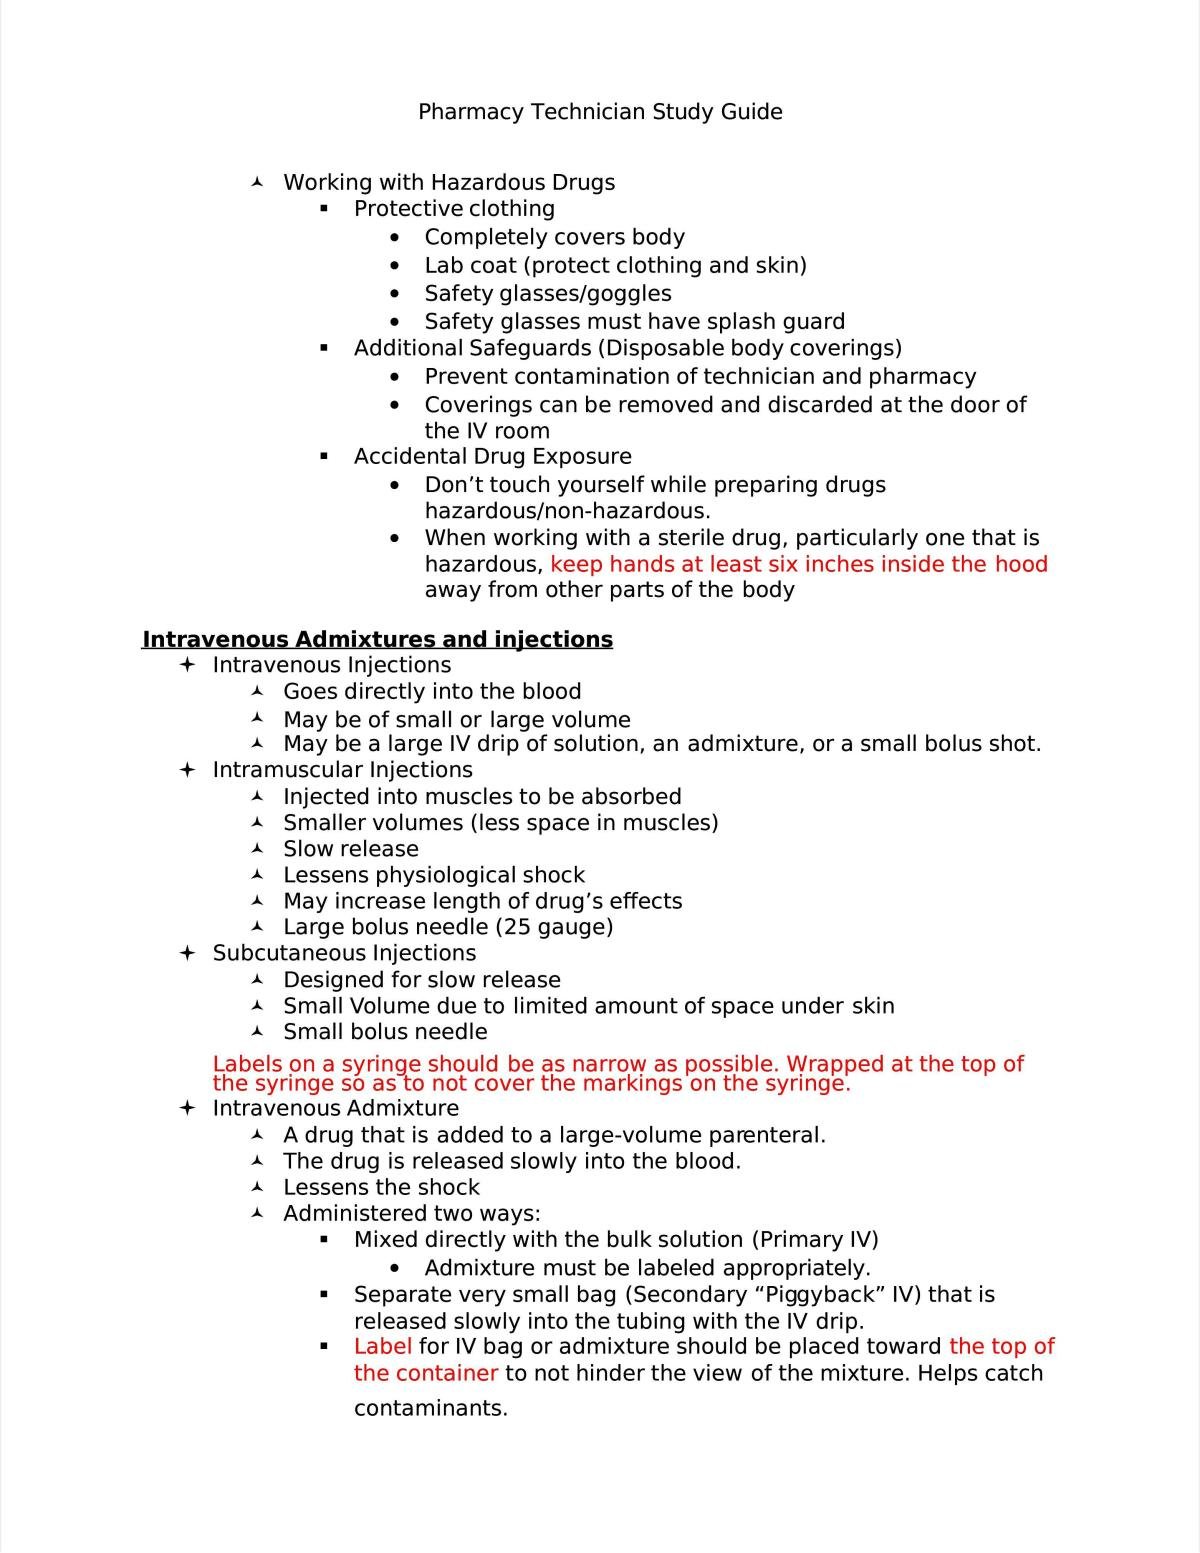 Pharmacy Technician Study Notes - Page 15